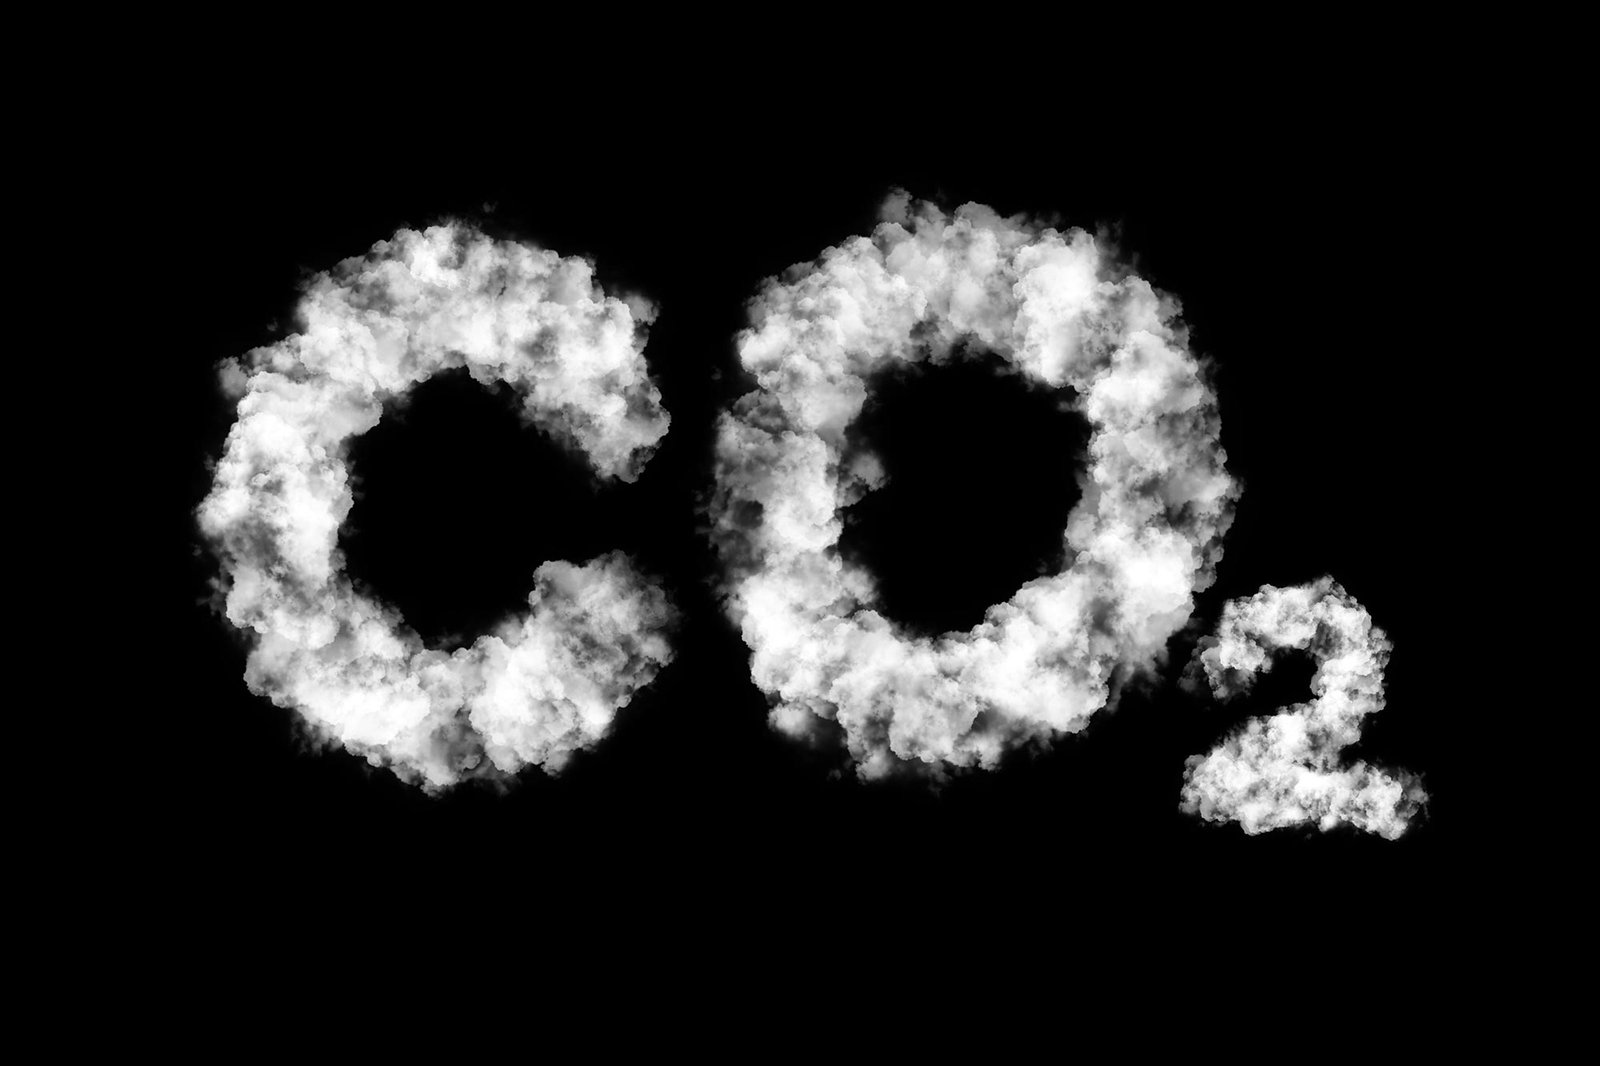 Cheap Catalyst Made Out of Sugar Has the Power To Destroy CO2